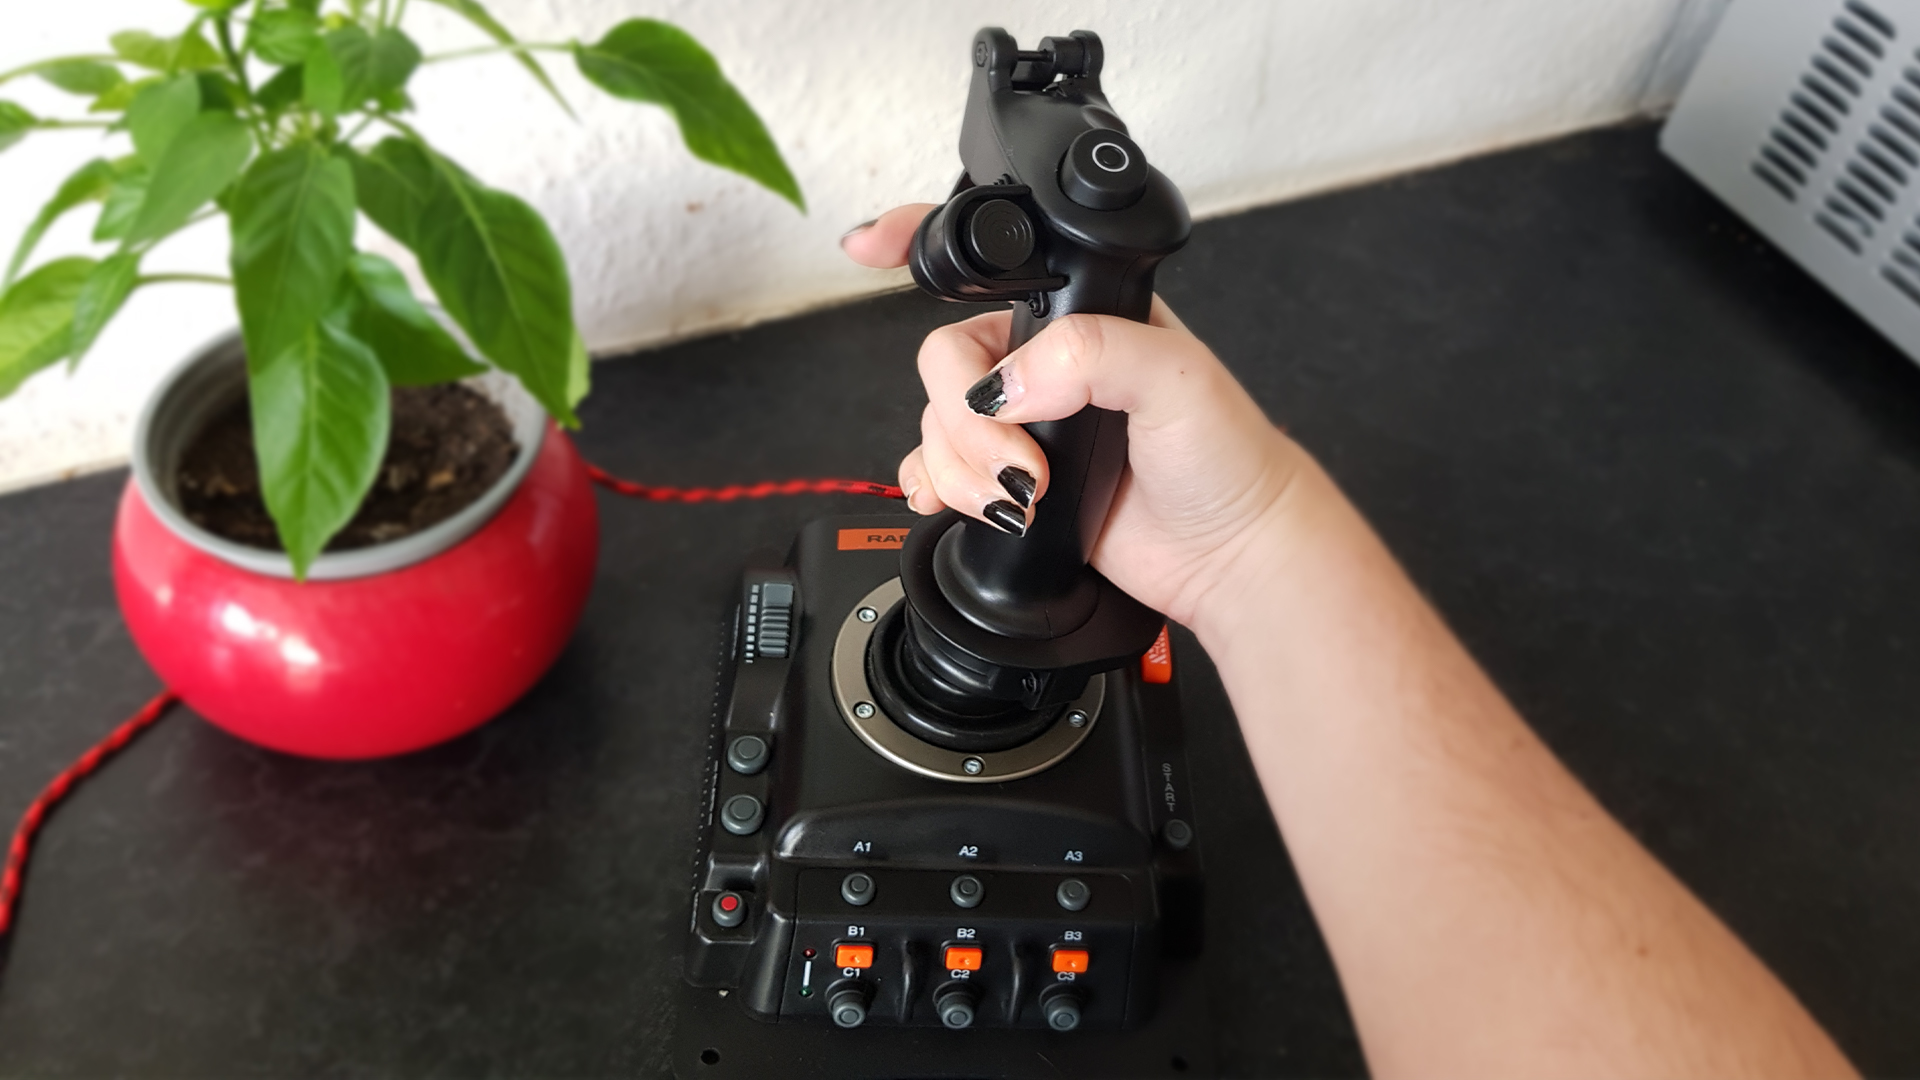 The FR-Tec Raptor Mach 2 in hand with plant